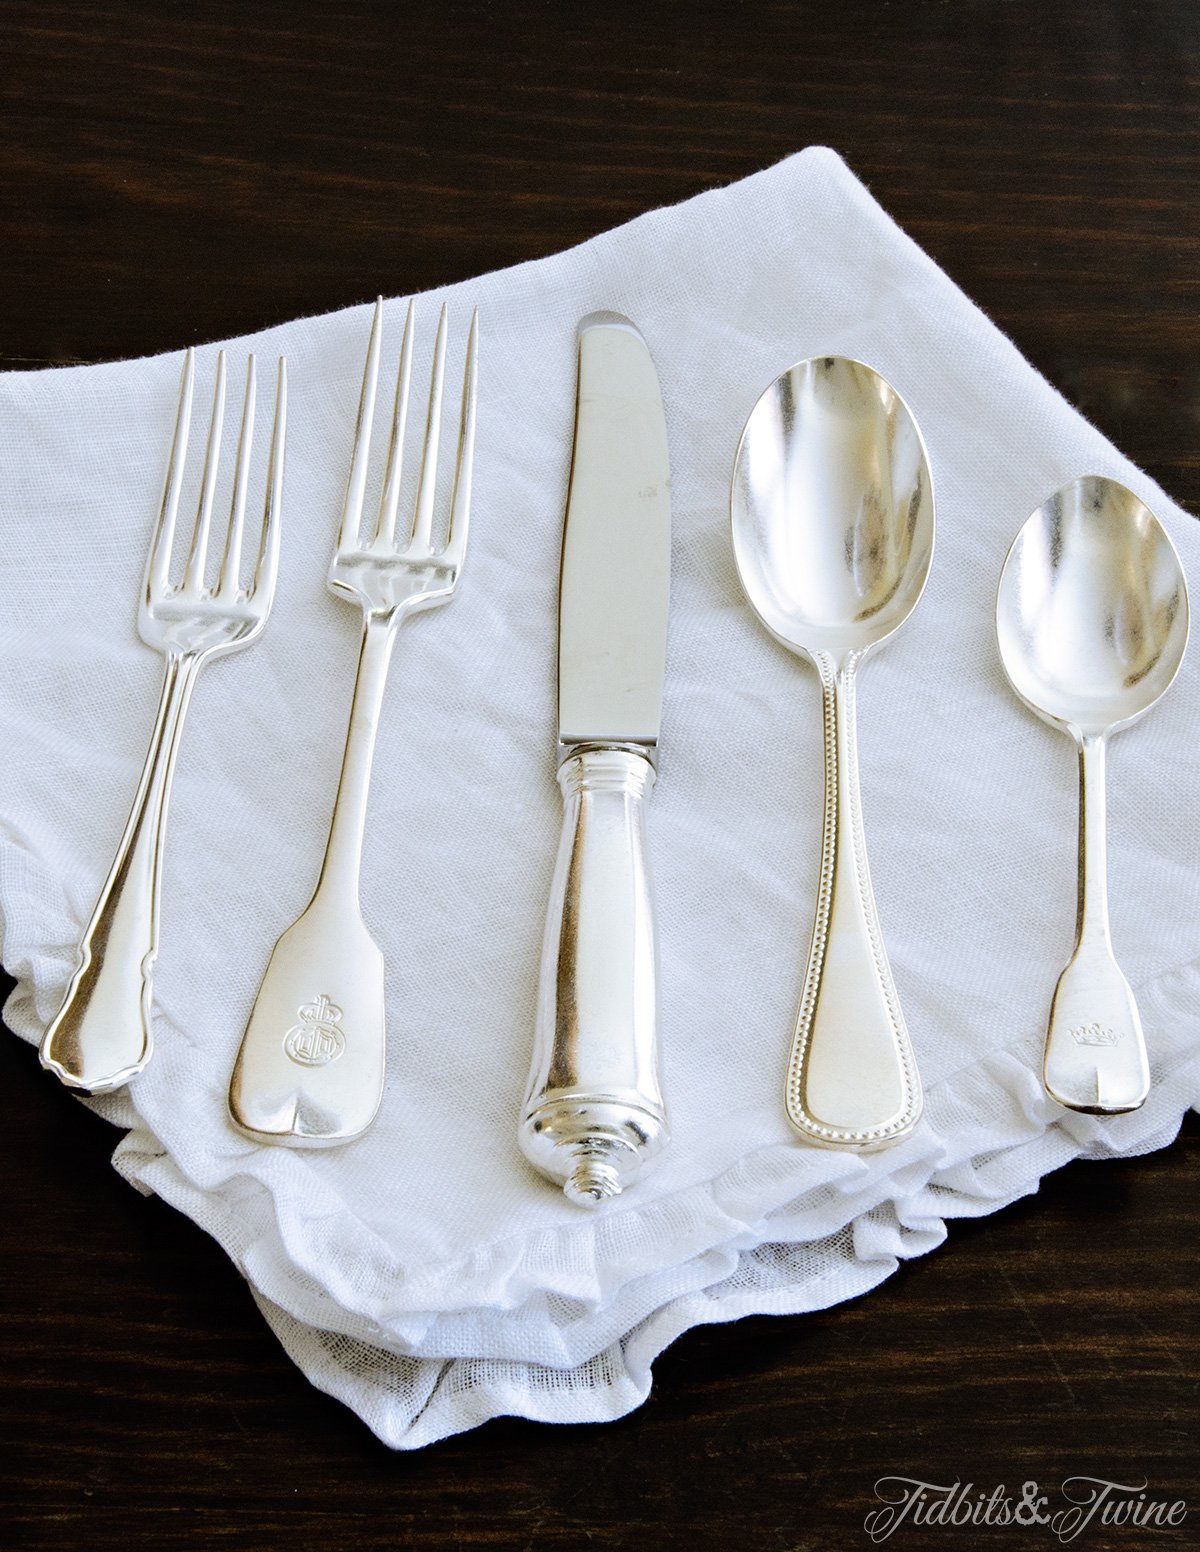 Gorgeous Flatware to Inspire!